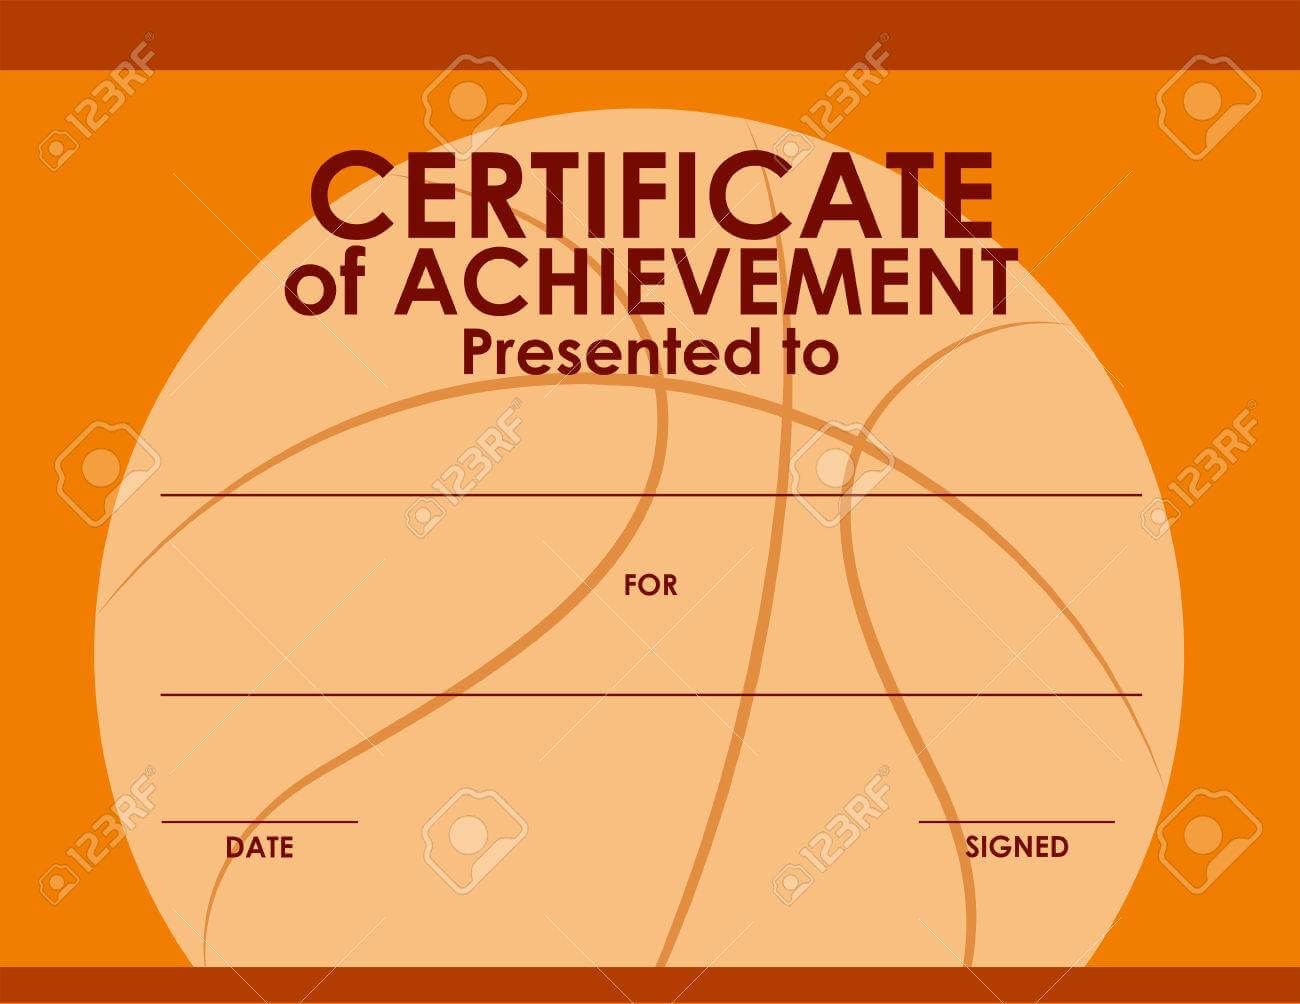 Certificate Template With Basketball Background Illustration In Basketball Certificate Template